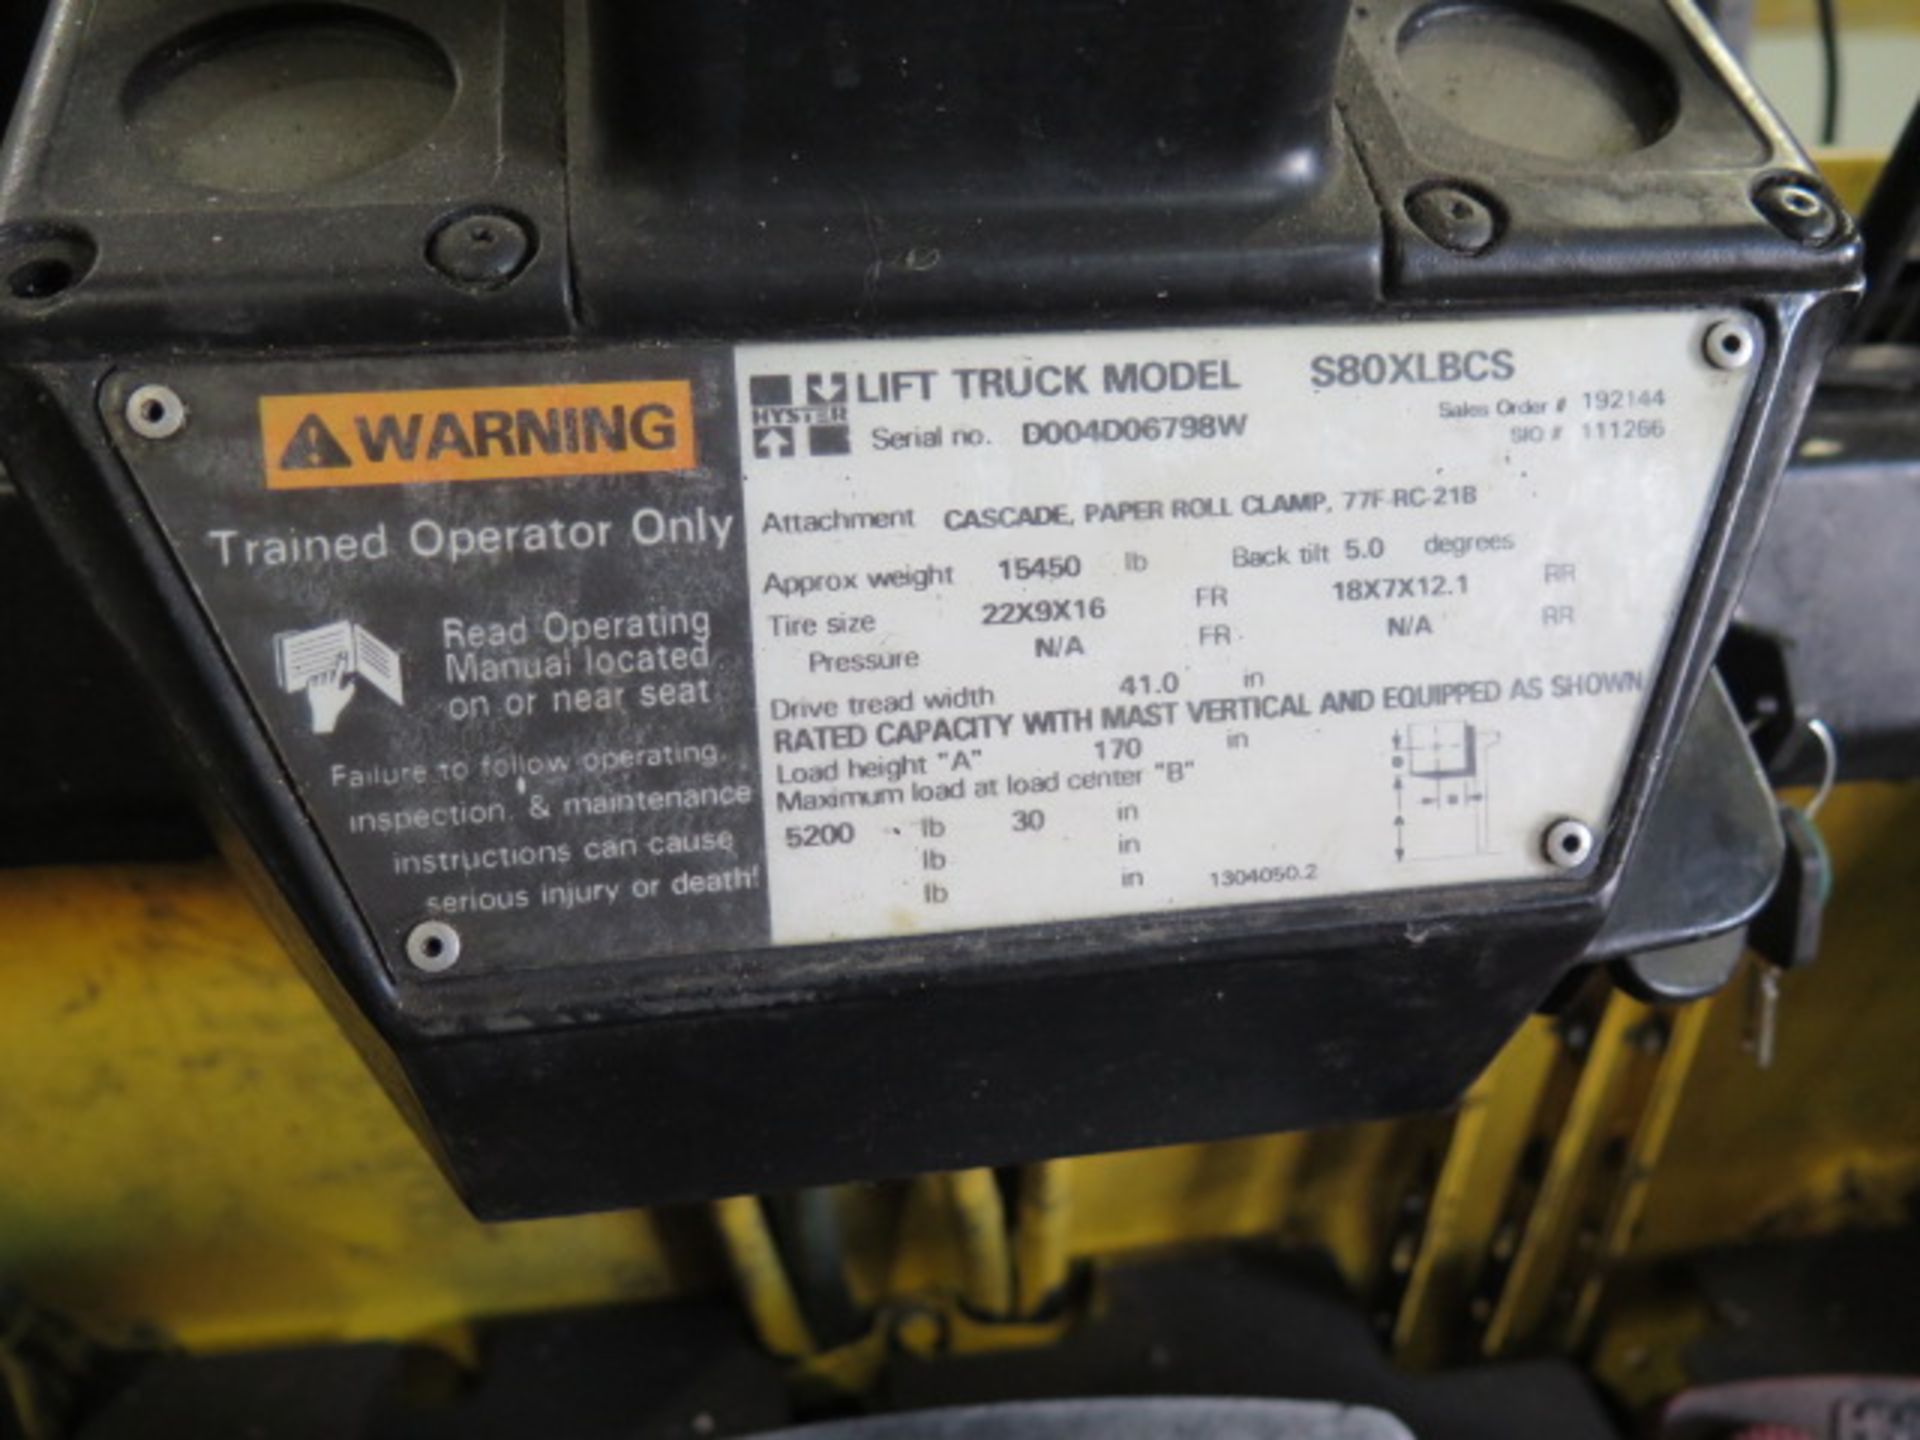 Hyster S80XLBCS 8000 Lb Cap LPG Forklift s/n Doo4D06798W w/ 3-Stage Mast, 170” Lift, SOLD AS IS - Image 15 of 15